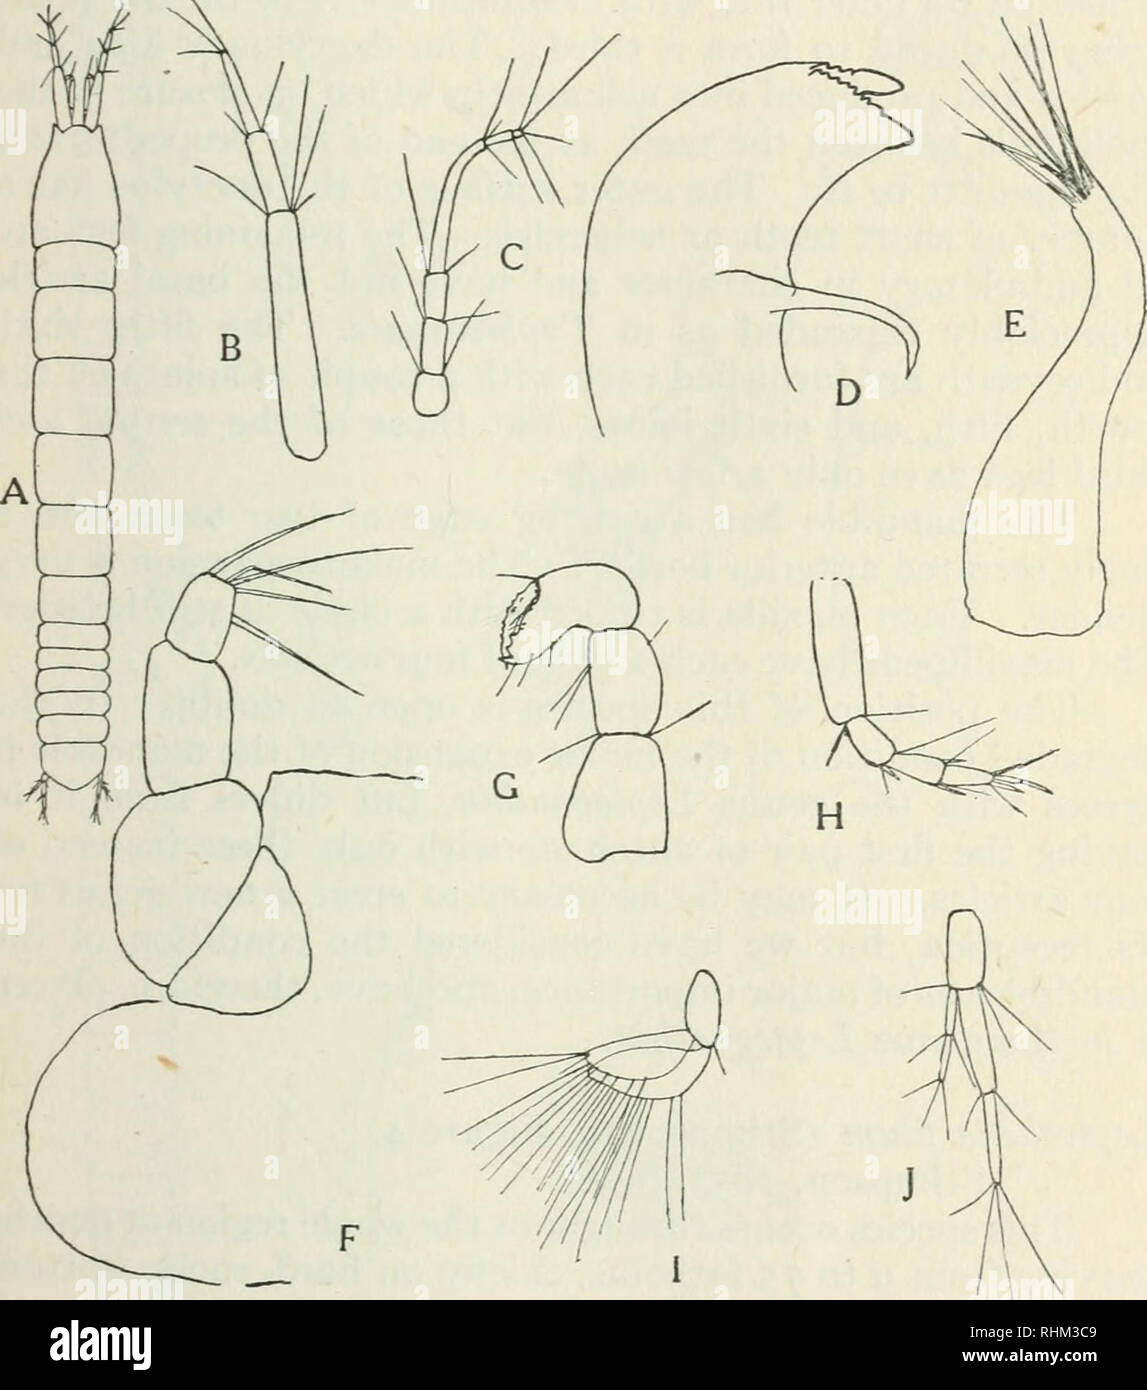 . Biological series. Biology. Wallace: The Isopoda of the Bay of Fundy ii and the seventh approximately equal in length to the second. The thorax narrows to the seventh segment. The sixth segment of the abdomen is longer than any of the others, which are subequal, and is rounded posteriorly.. Fig. 3. Leptognathta (?) psammophila, sp.n.; (A), female, dorsal view, x 20; (B). first antenna, X 80; (C), second antenna, x 80; (D), mandible, x 320; (E), maxilla, x 320: (F), maxilliped, x 320; (G), gnathopod, x 40; (H), fourth leg, x 80; (I), pleopod, x 80; (J), uropod, x 80. The peduncle of the biram Stock Photo